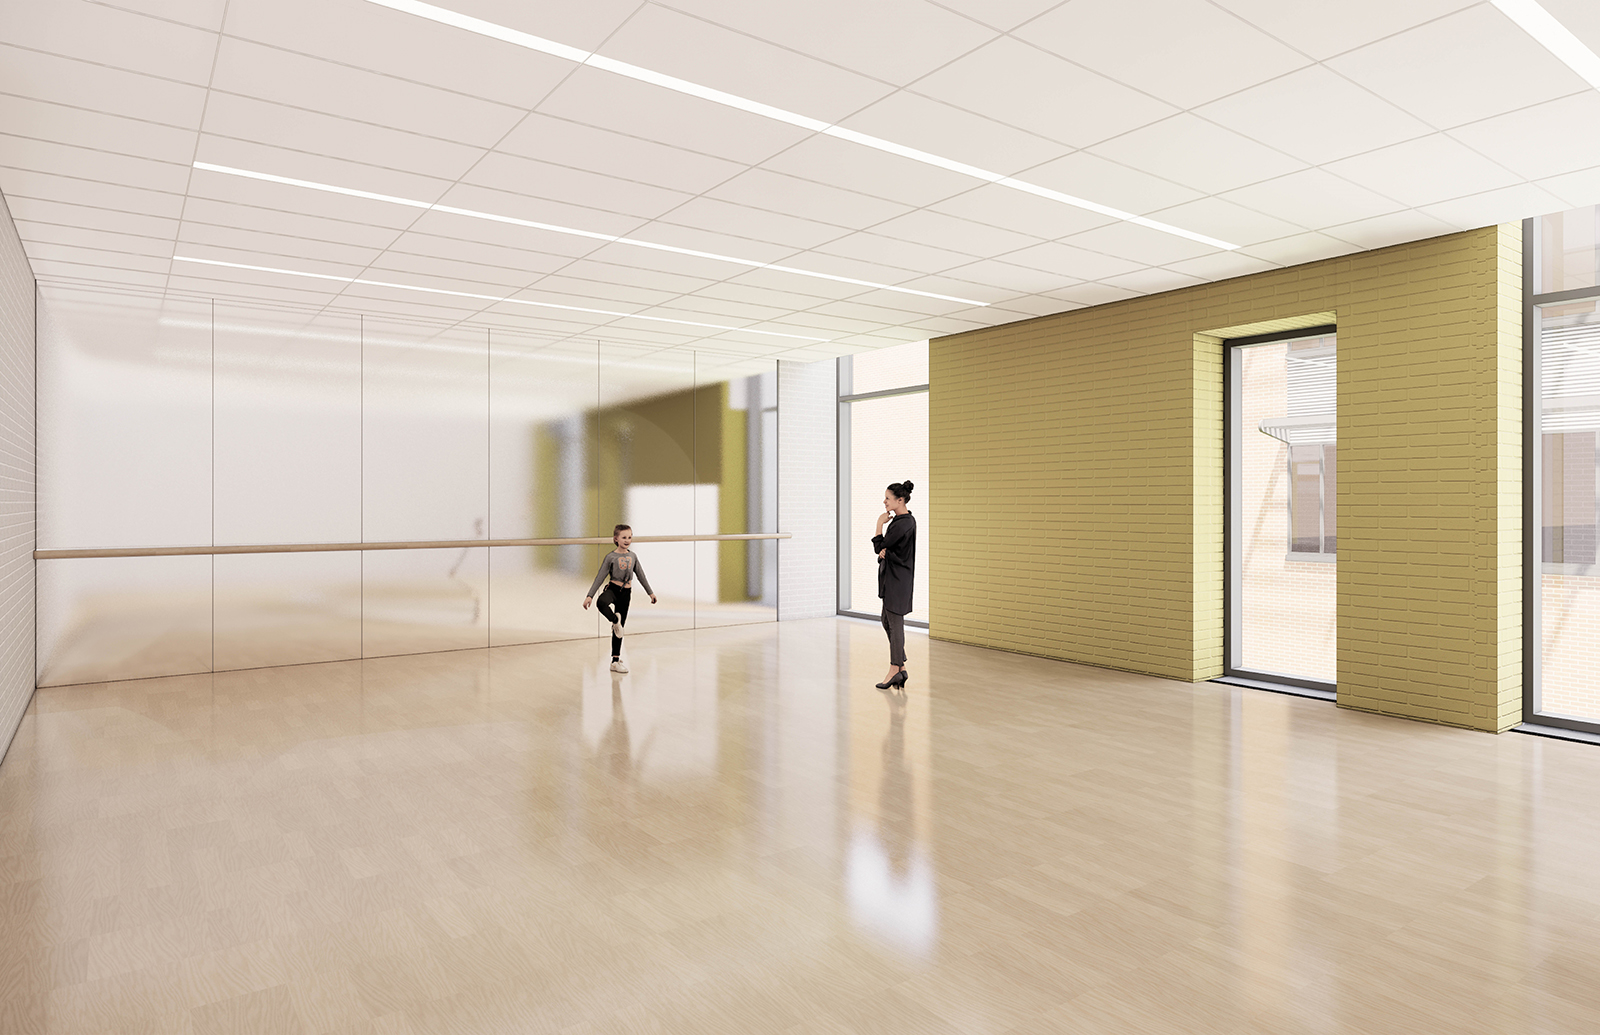 A rendering of the dance studio. The right wall has three floor to ceiling windows. The floors are wooden. The back wall is floor to ceiling mirrors with a ballet barre. A student and teacher are practicing in the space.